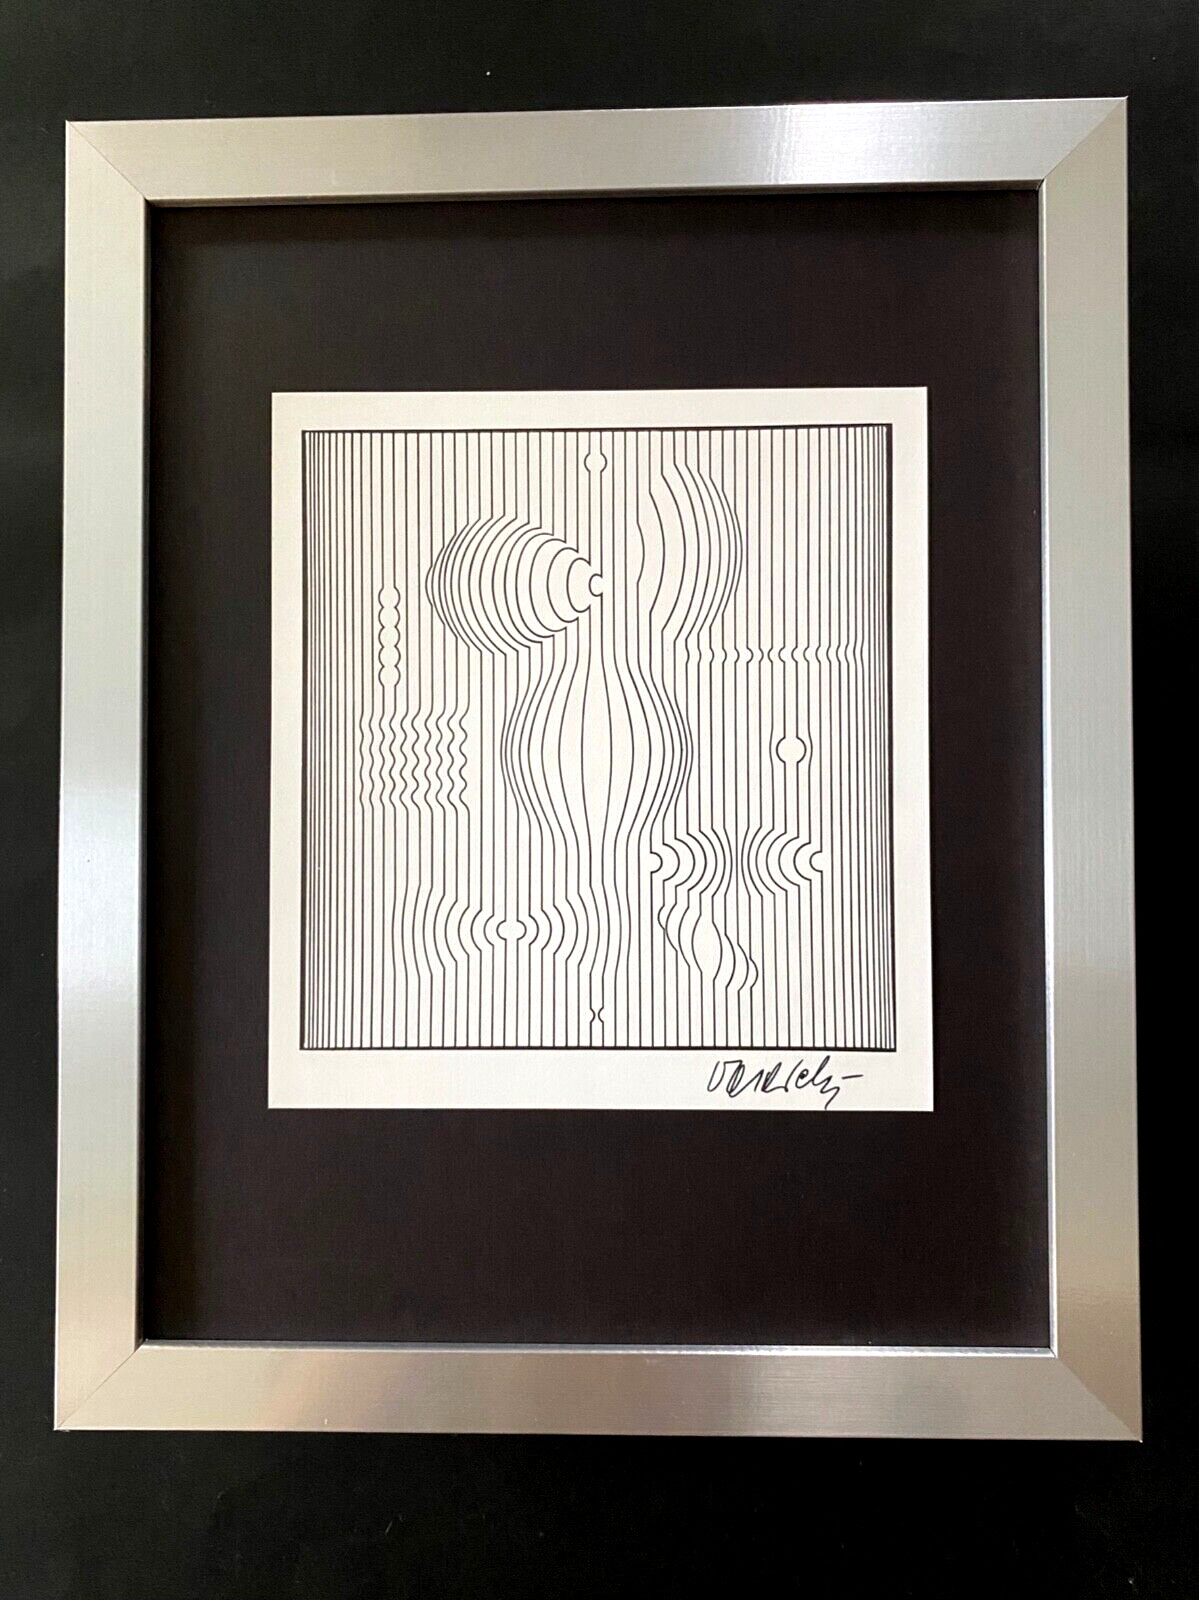 VICTOR VASARELY  PRINT FROM 1970 + SIGNED GEOMETRIC ABSTRACT +NEW FRAME 14x11in.